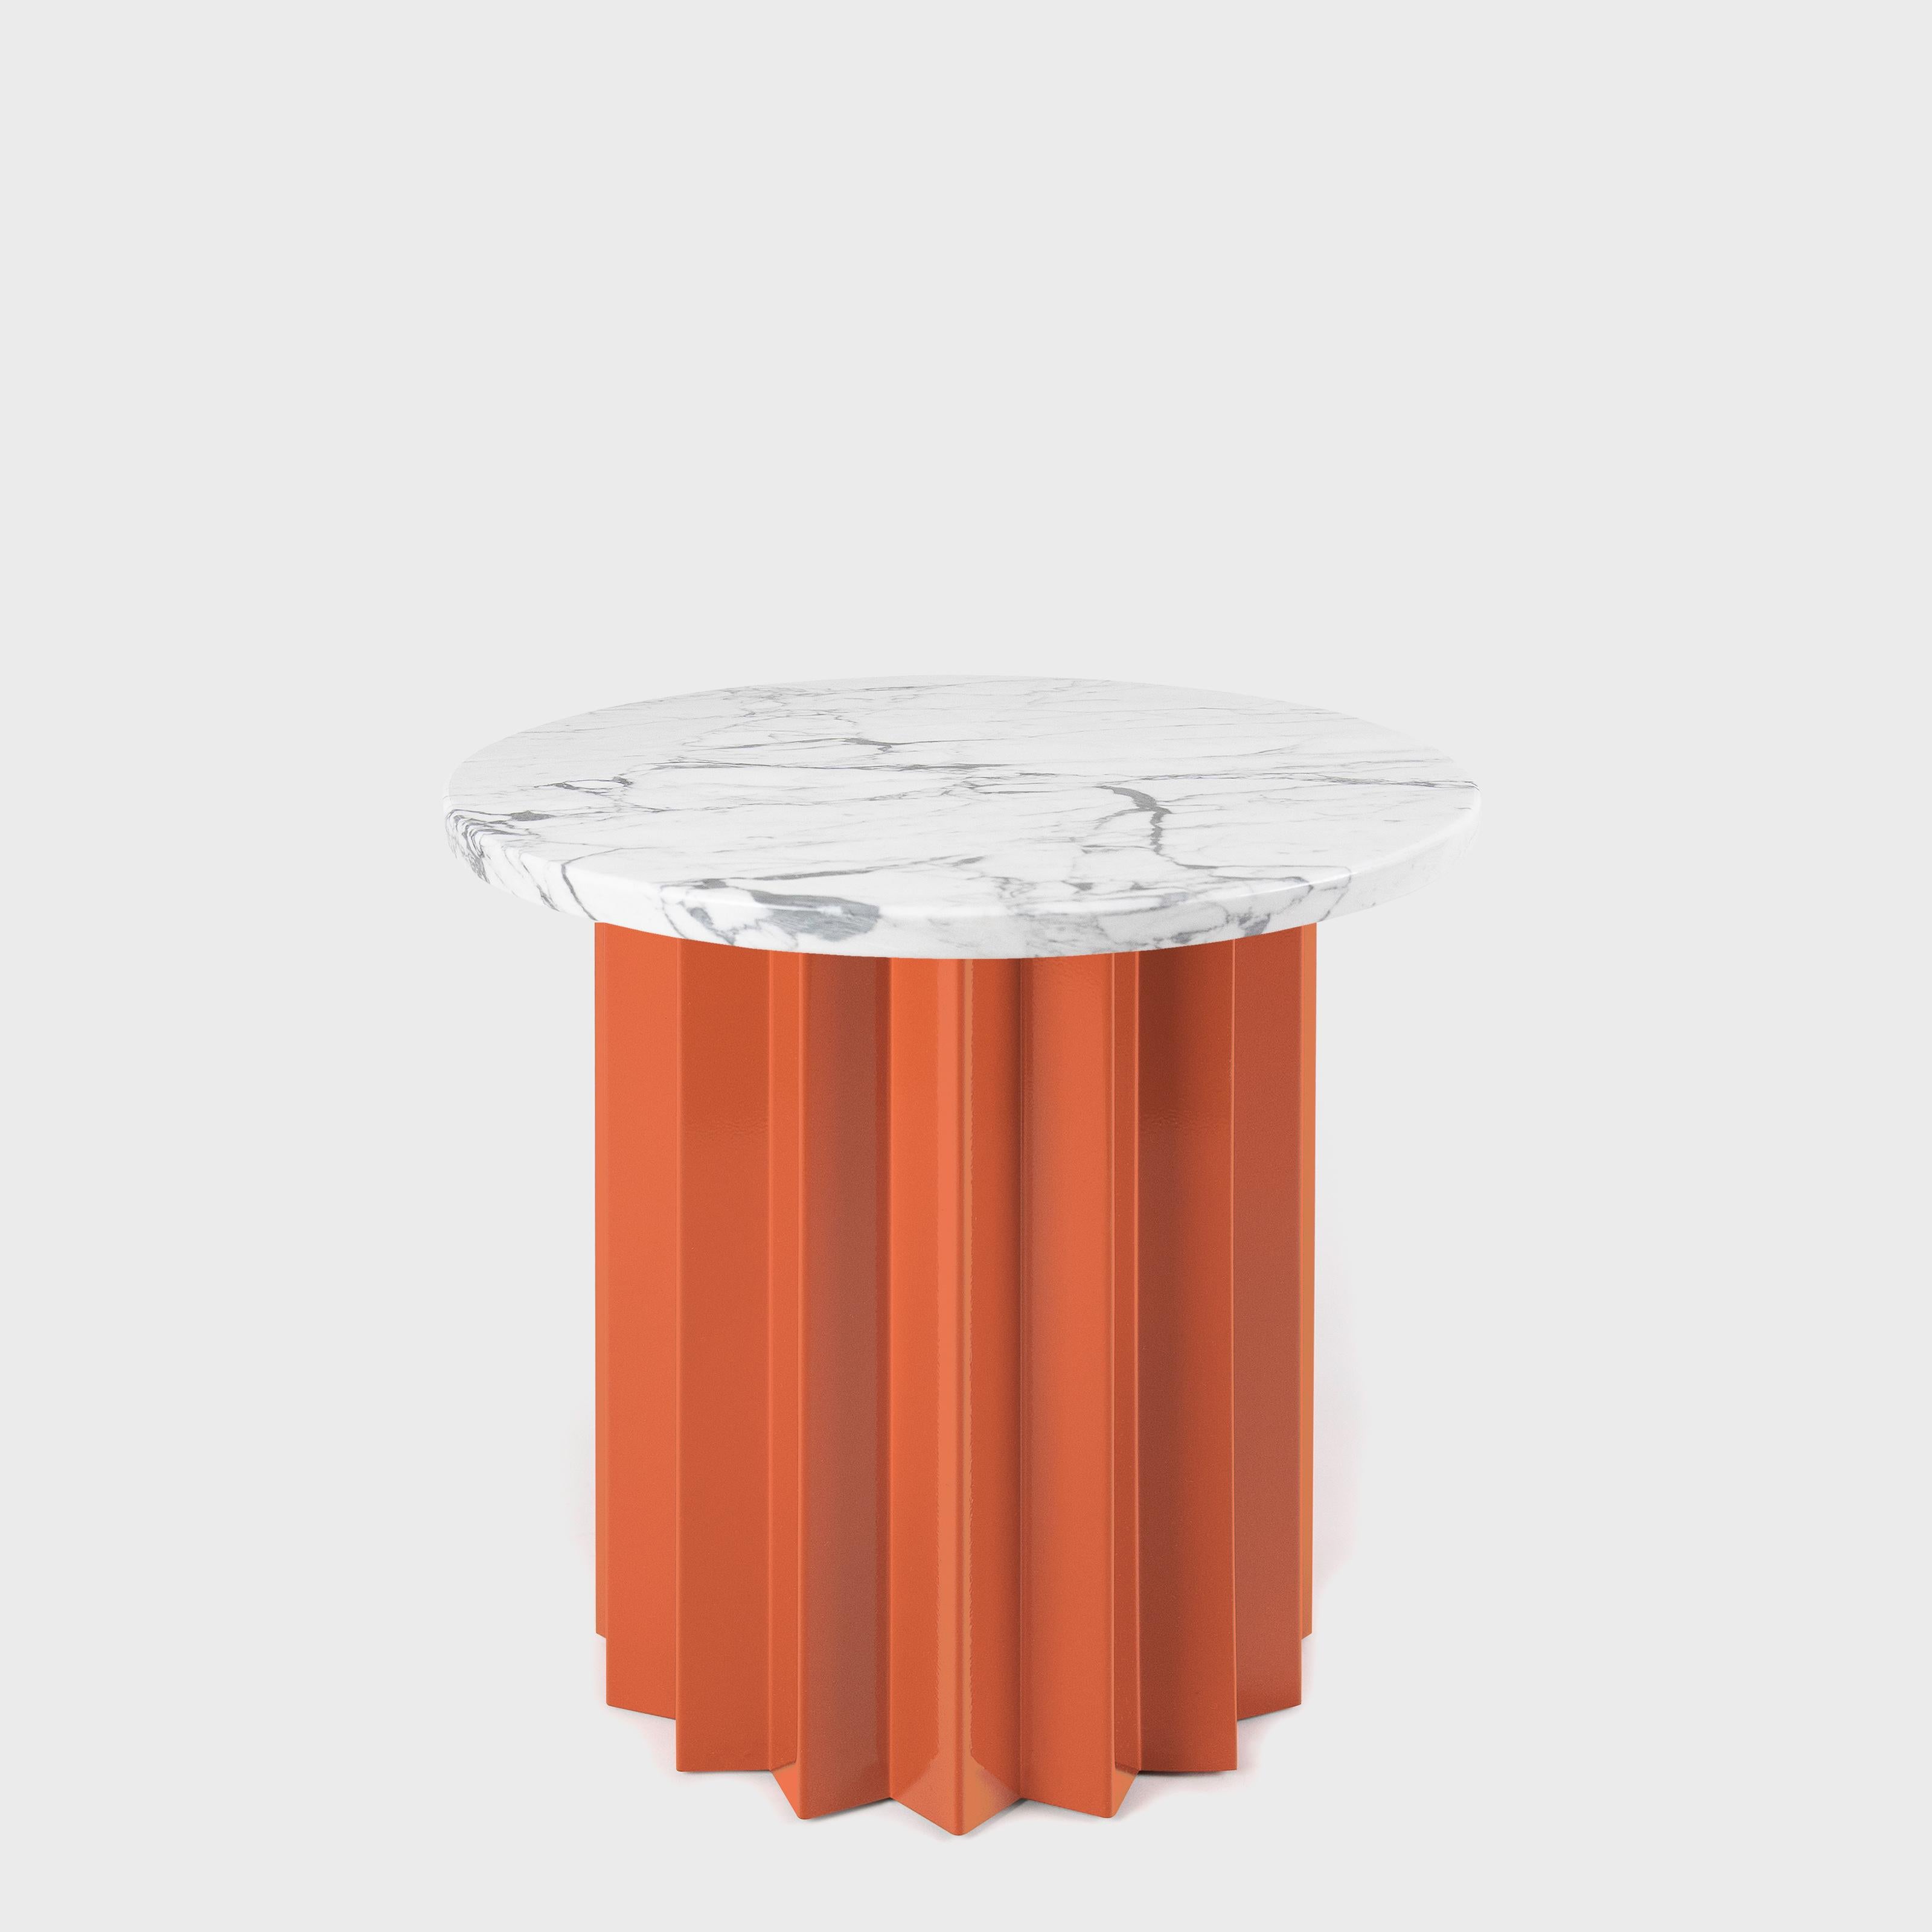 Metalwork Contemporary Modern, Volume Low Side Table, Metal Base & Carrara Marble Top For Sale